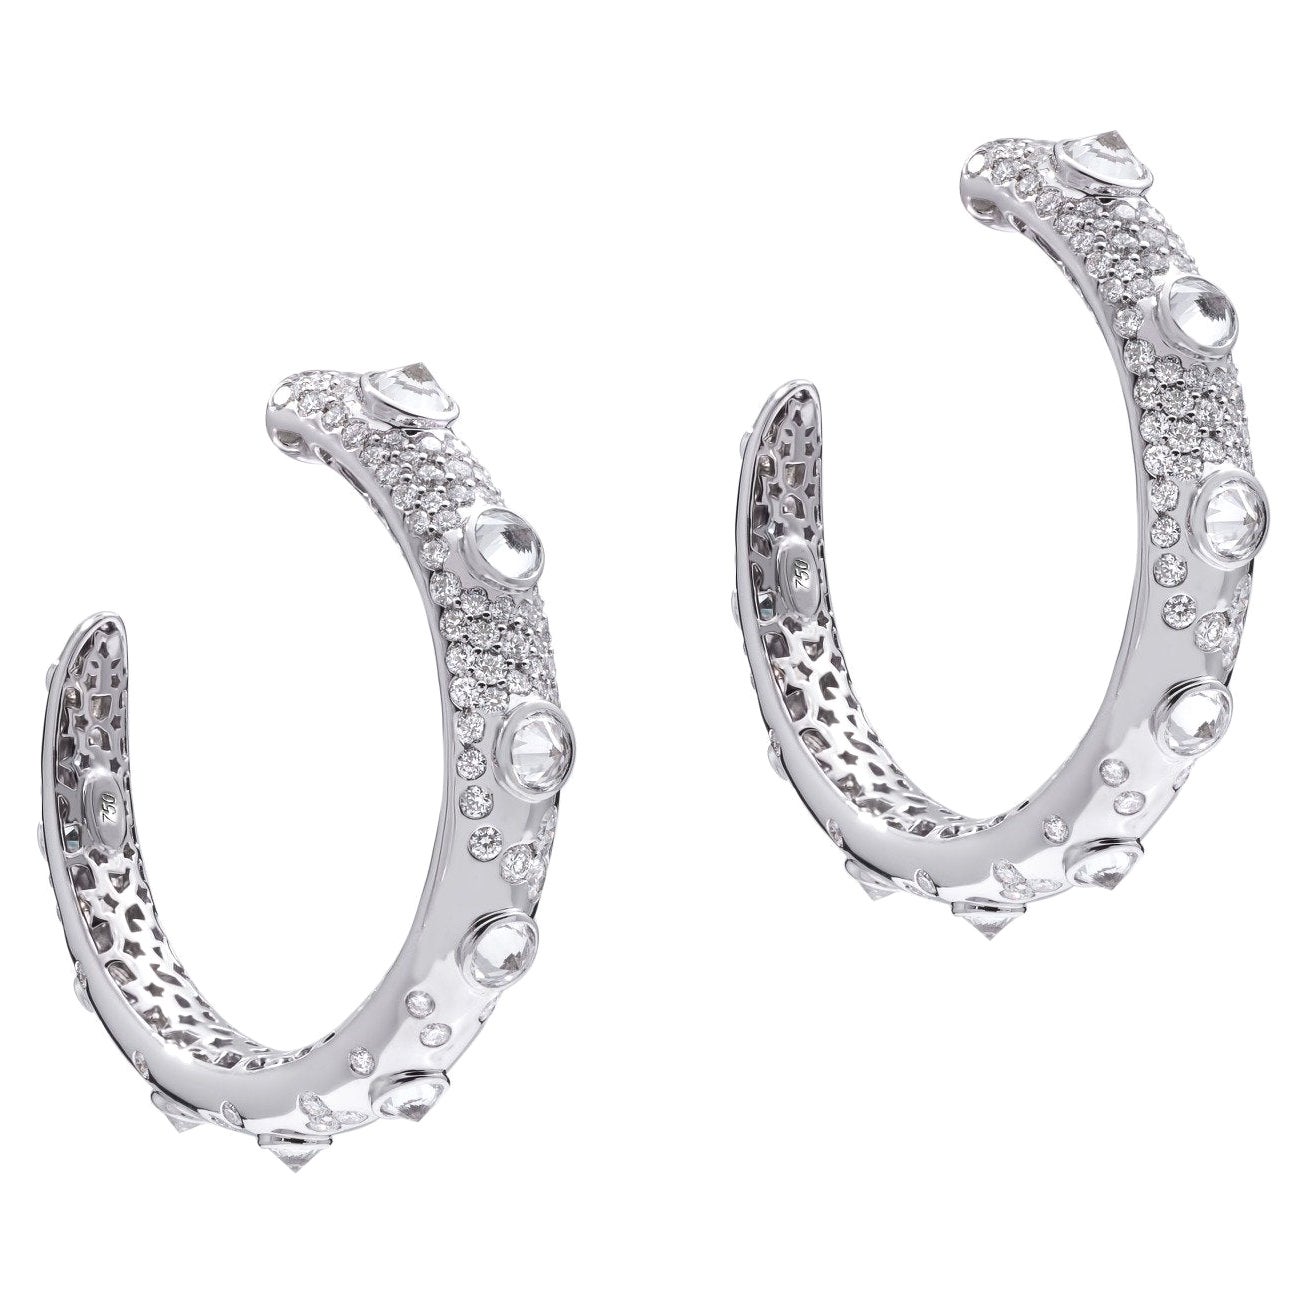 Albino Croc Hoops with Sapphires & Diamonds in 18ct White Gold